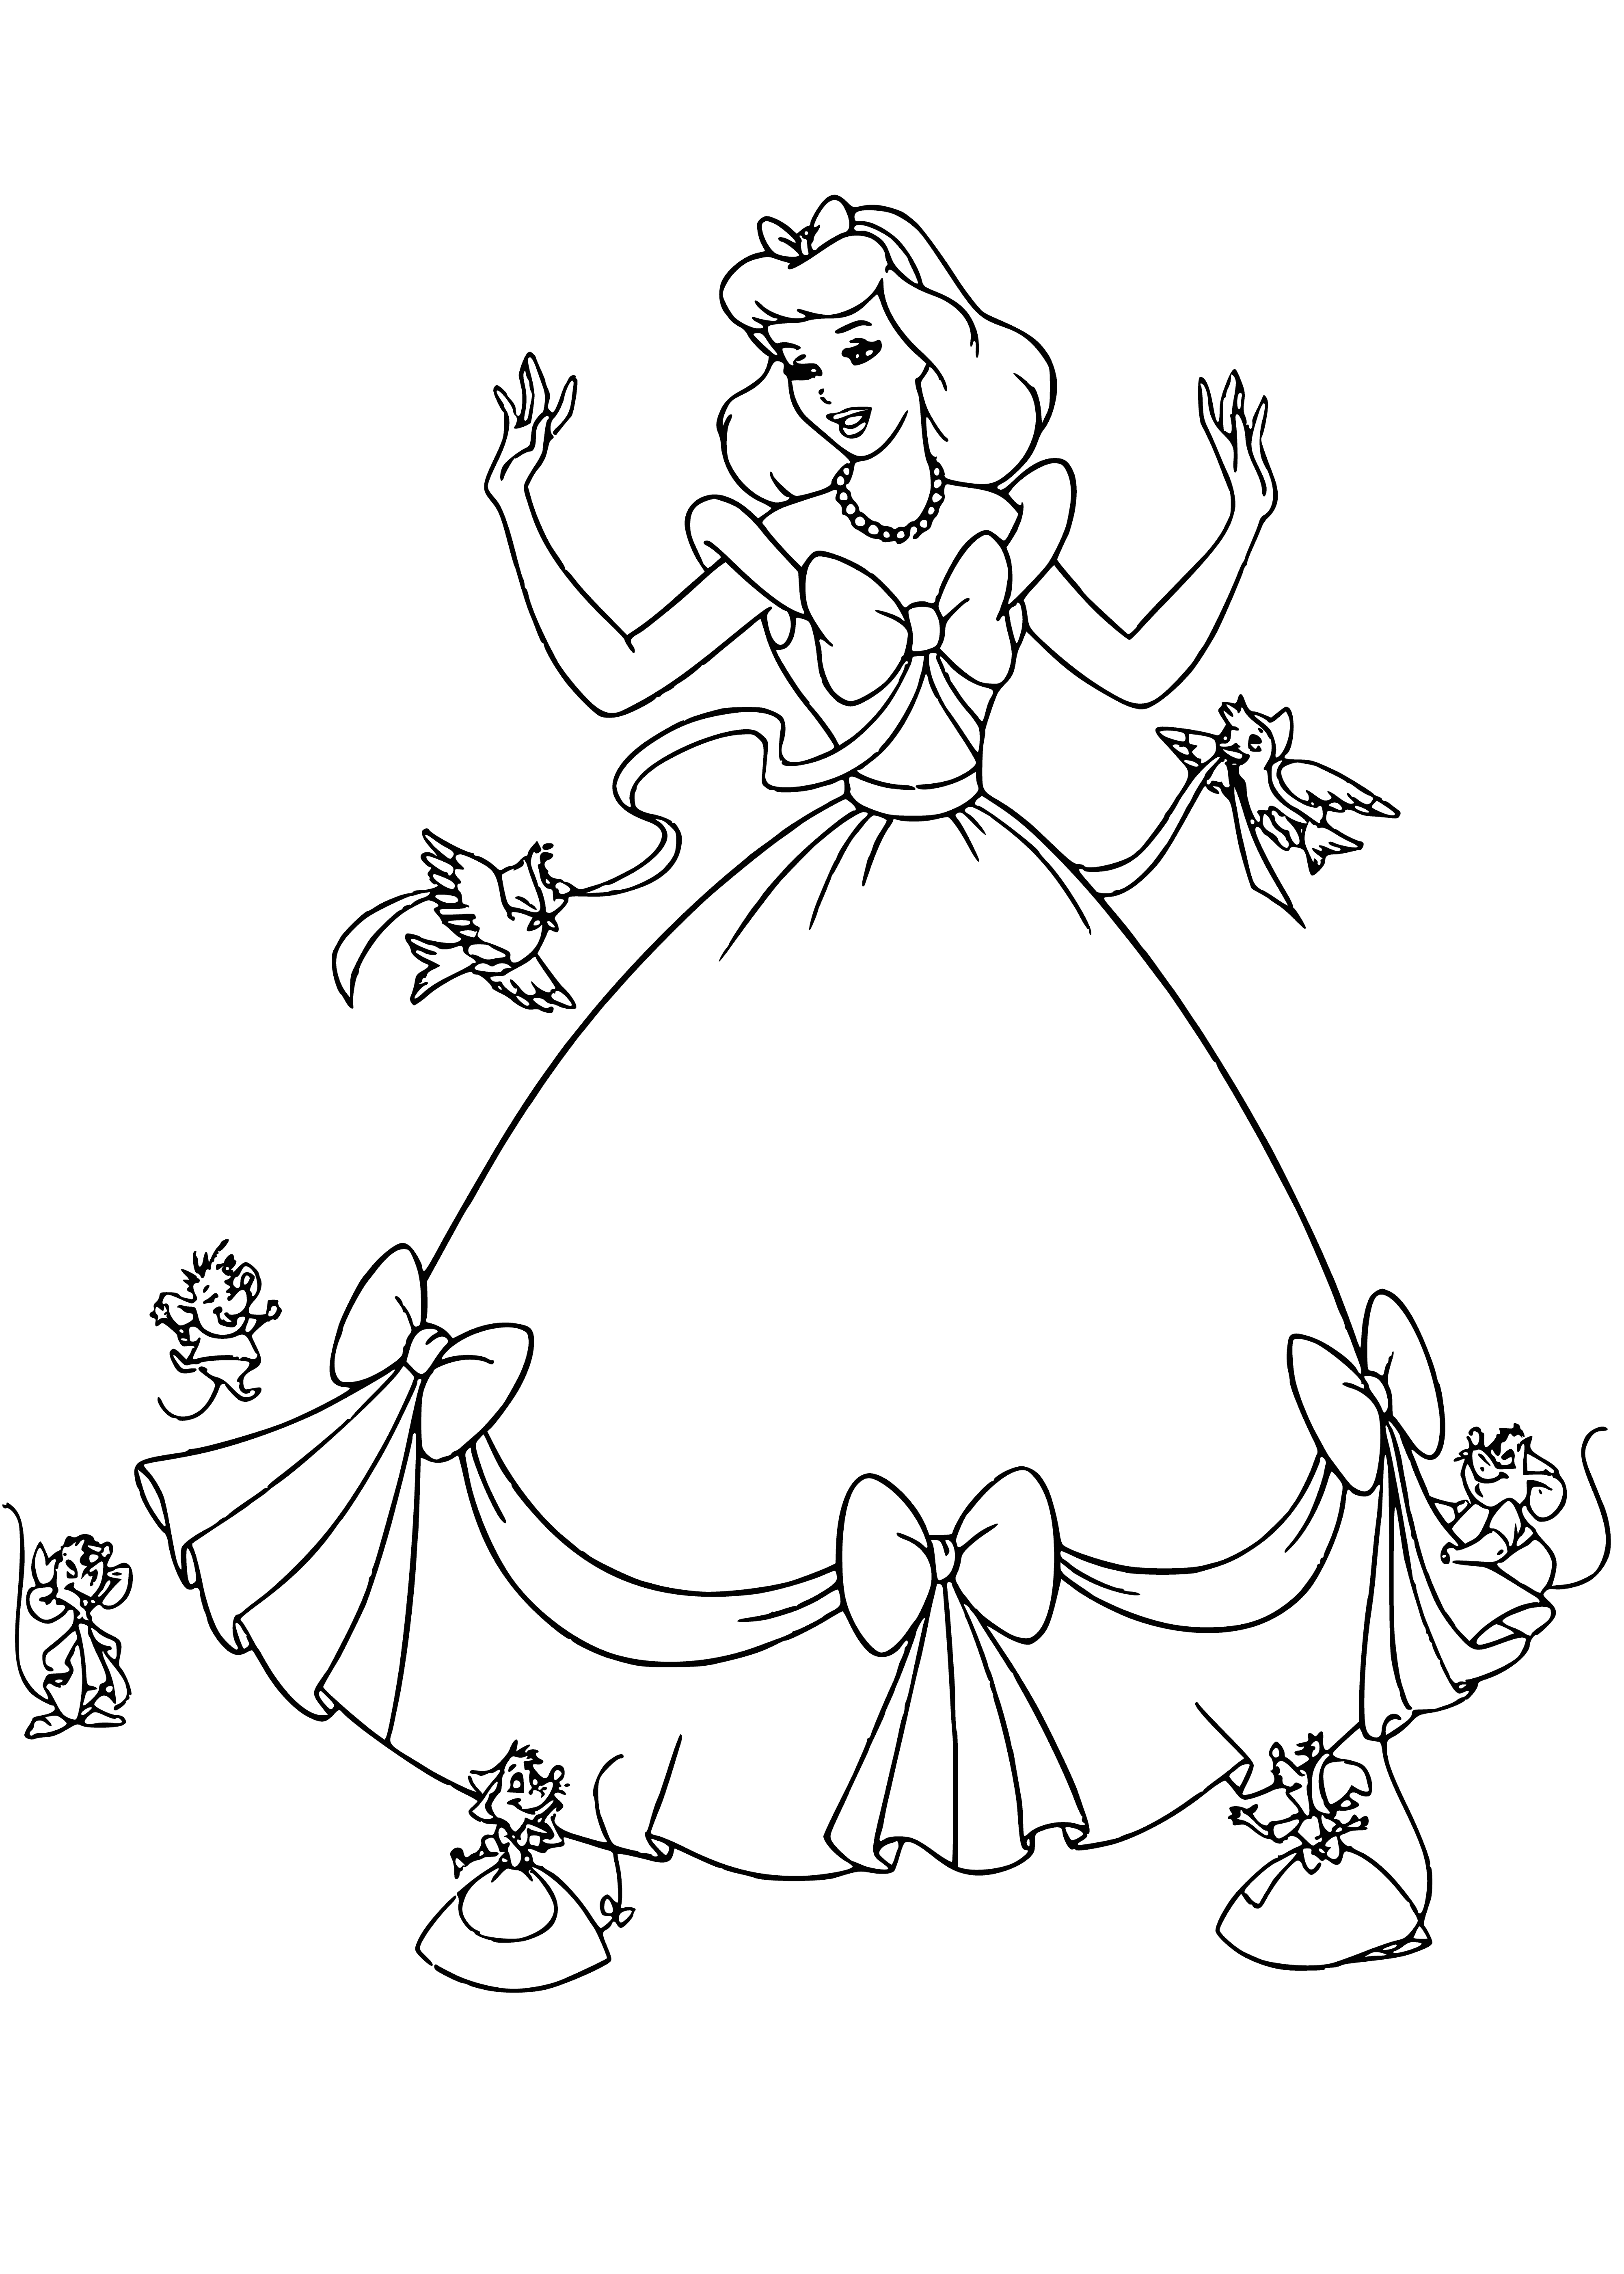 coloring page: Young woman admiring her look in mirror wearing dress, updo & delicate necklace. She looks happy & excited!